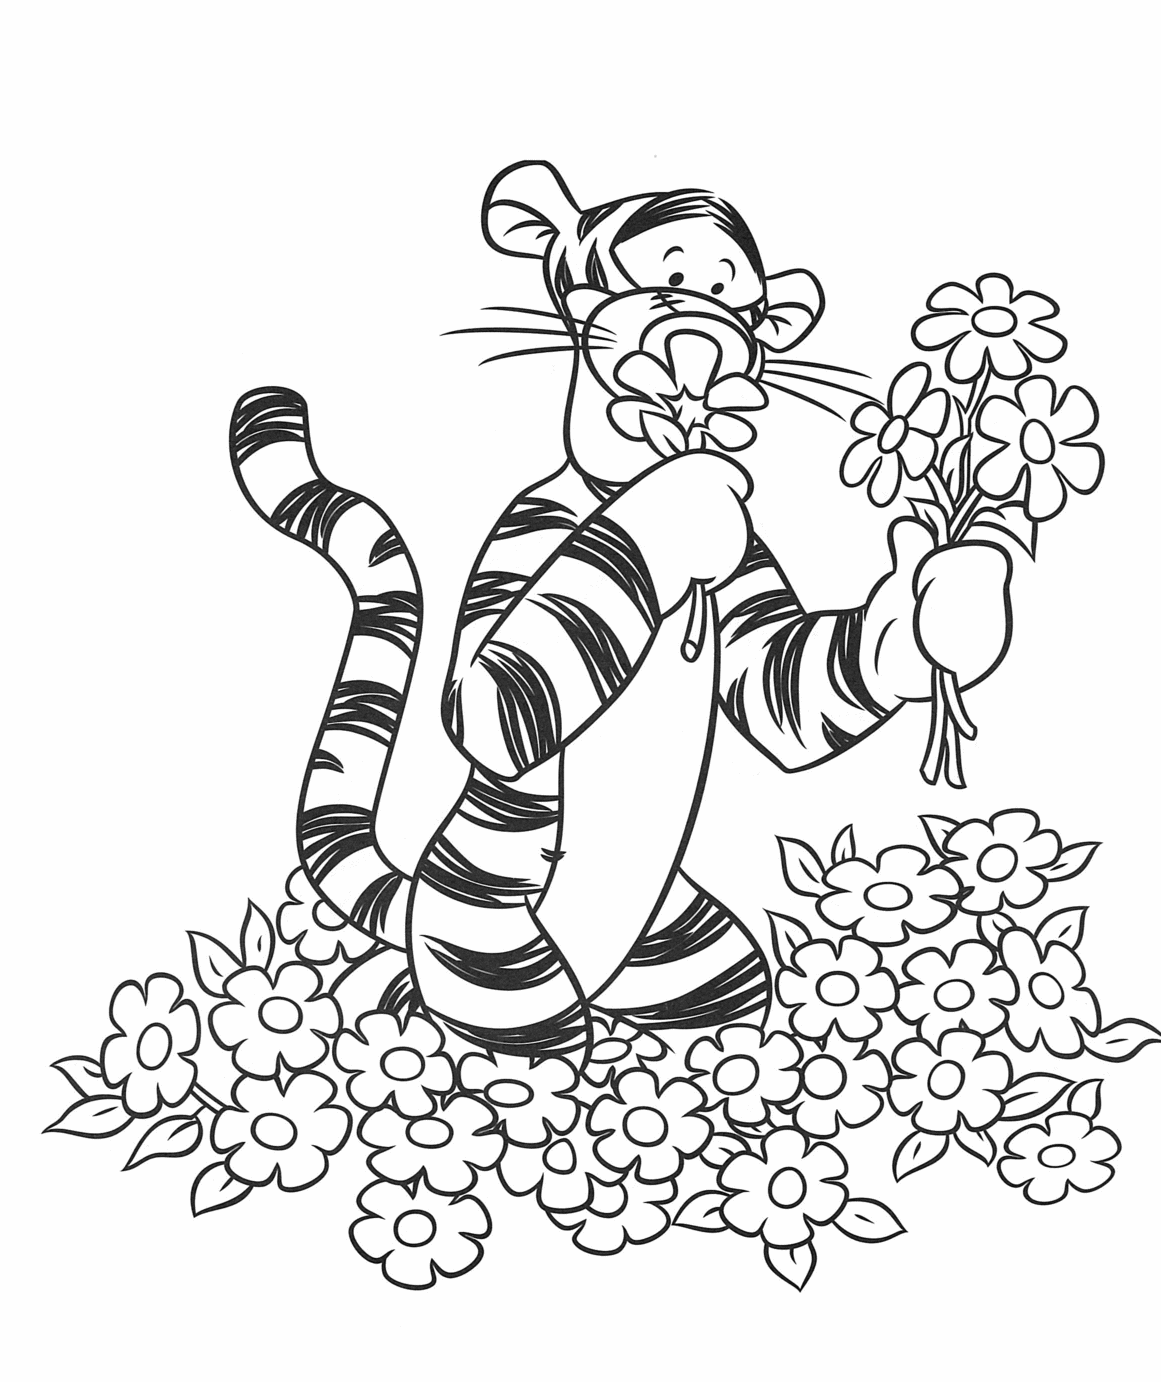 Disney Coloring Pages Coloring Books Cute Coloring Pages